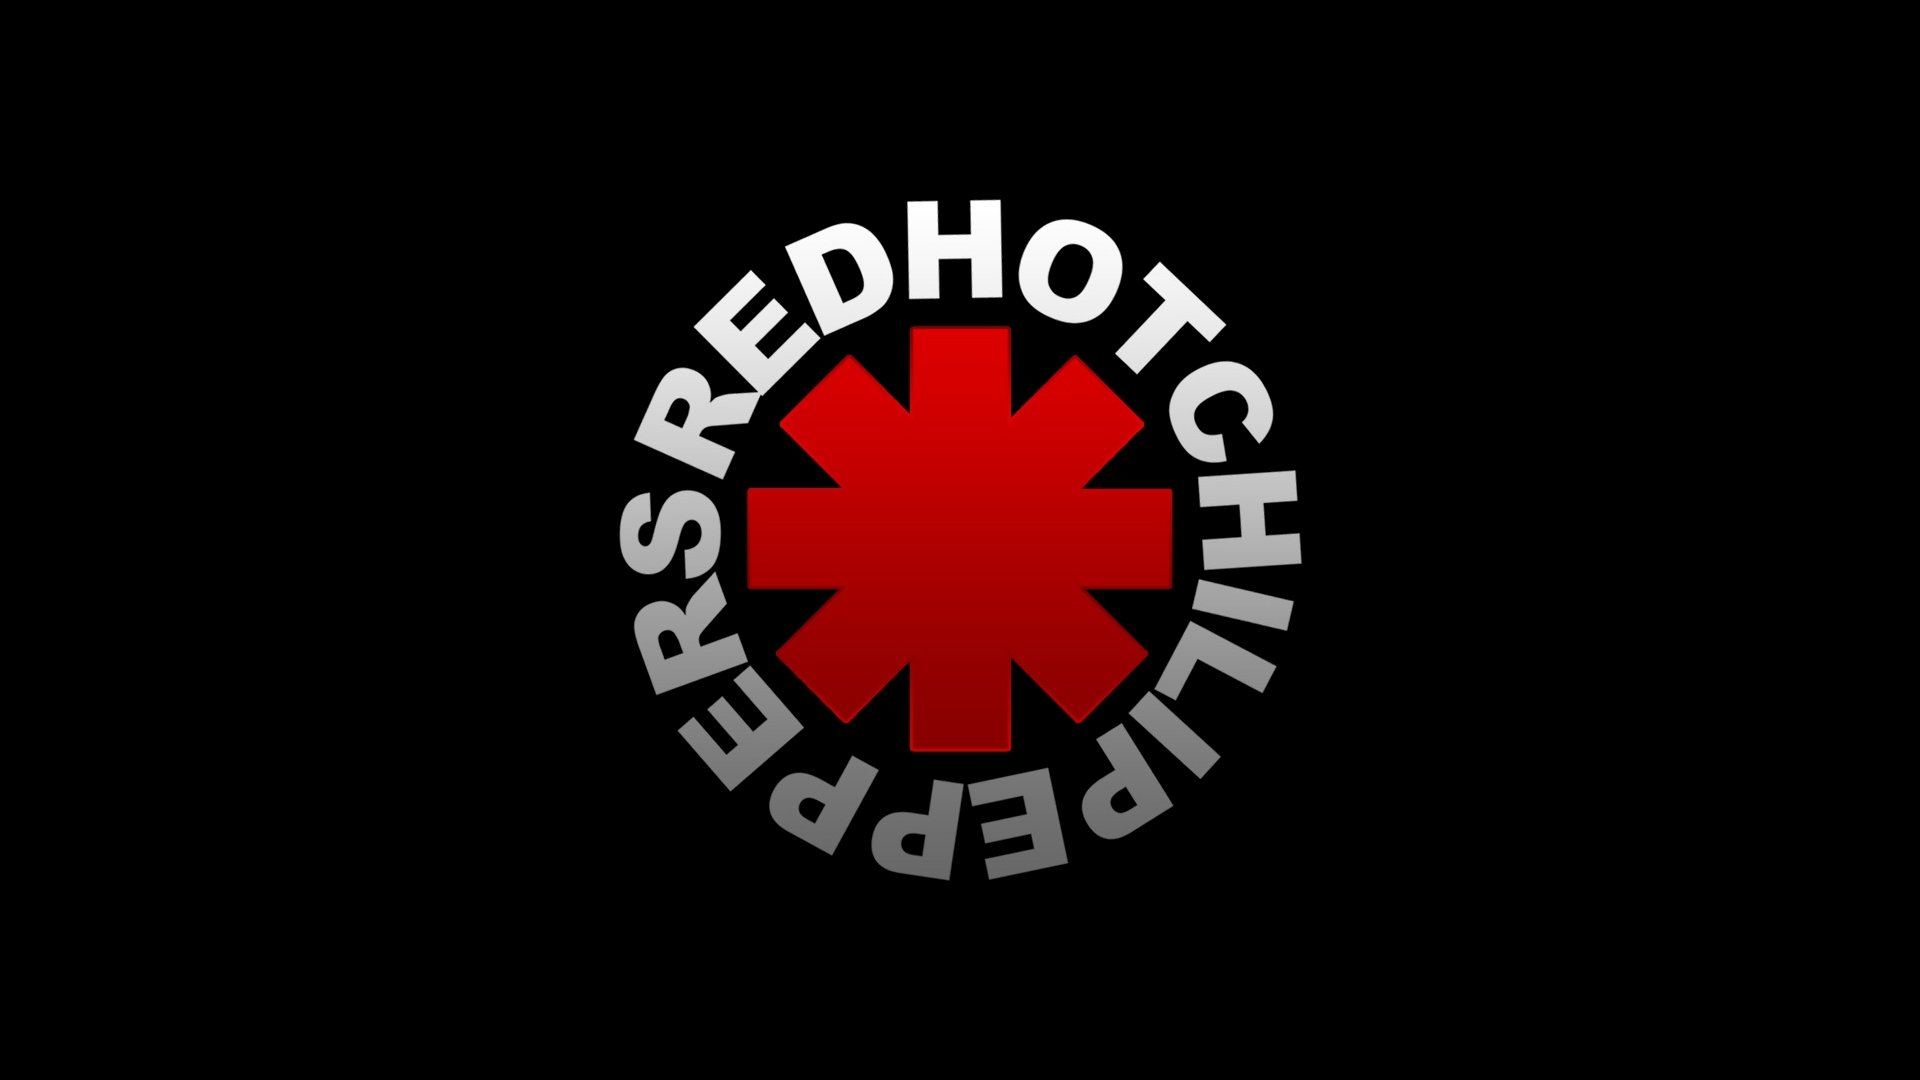 Red hot peppers dark. Red hot Chili Peppers логотип группы. Red hot Chili Peppers знак. Ред хот Чили пеперс эмблема. RHCP знак.